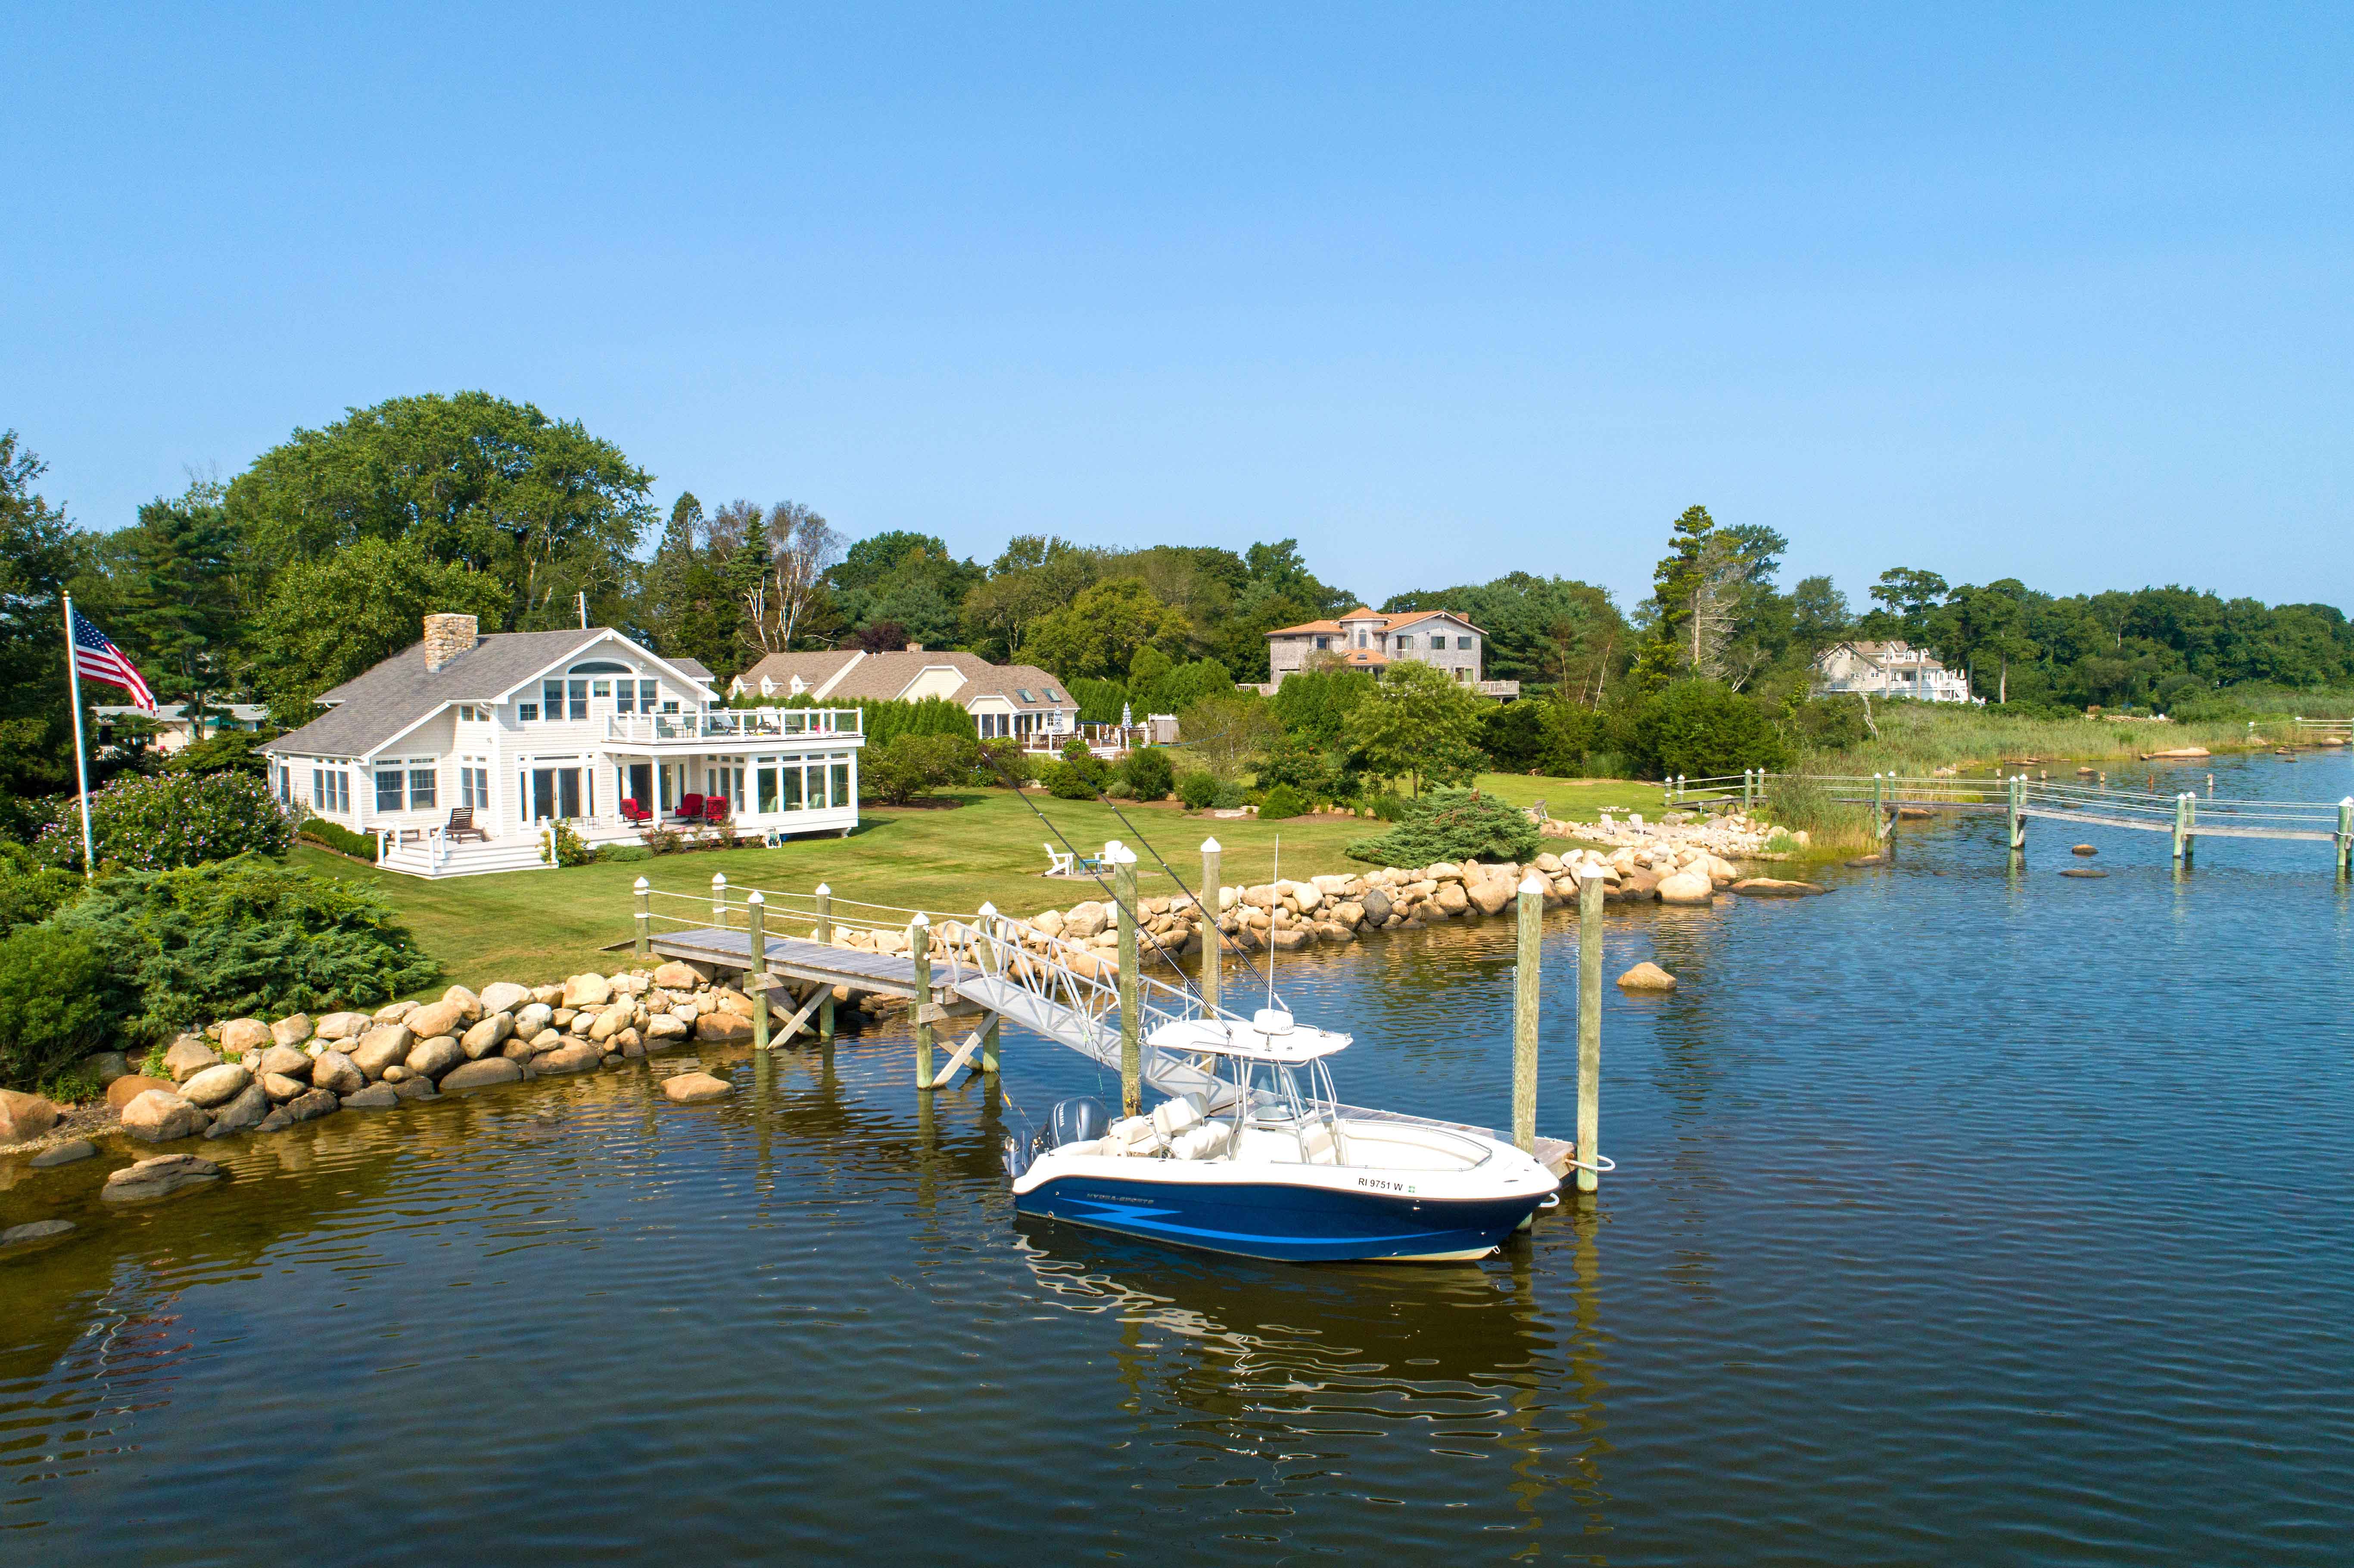 NINIGRET POND WATERFRONT HOME SELLS FOR $2.125M, WITH LILA DELMAN REPRESENTING BOTH SIDES OF THE TRANSACTION